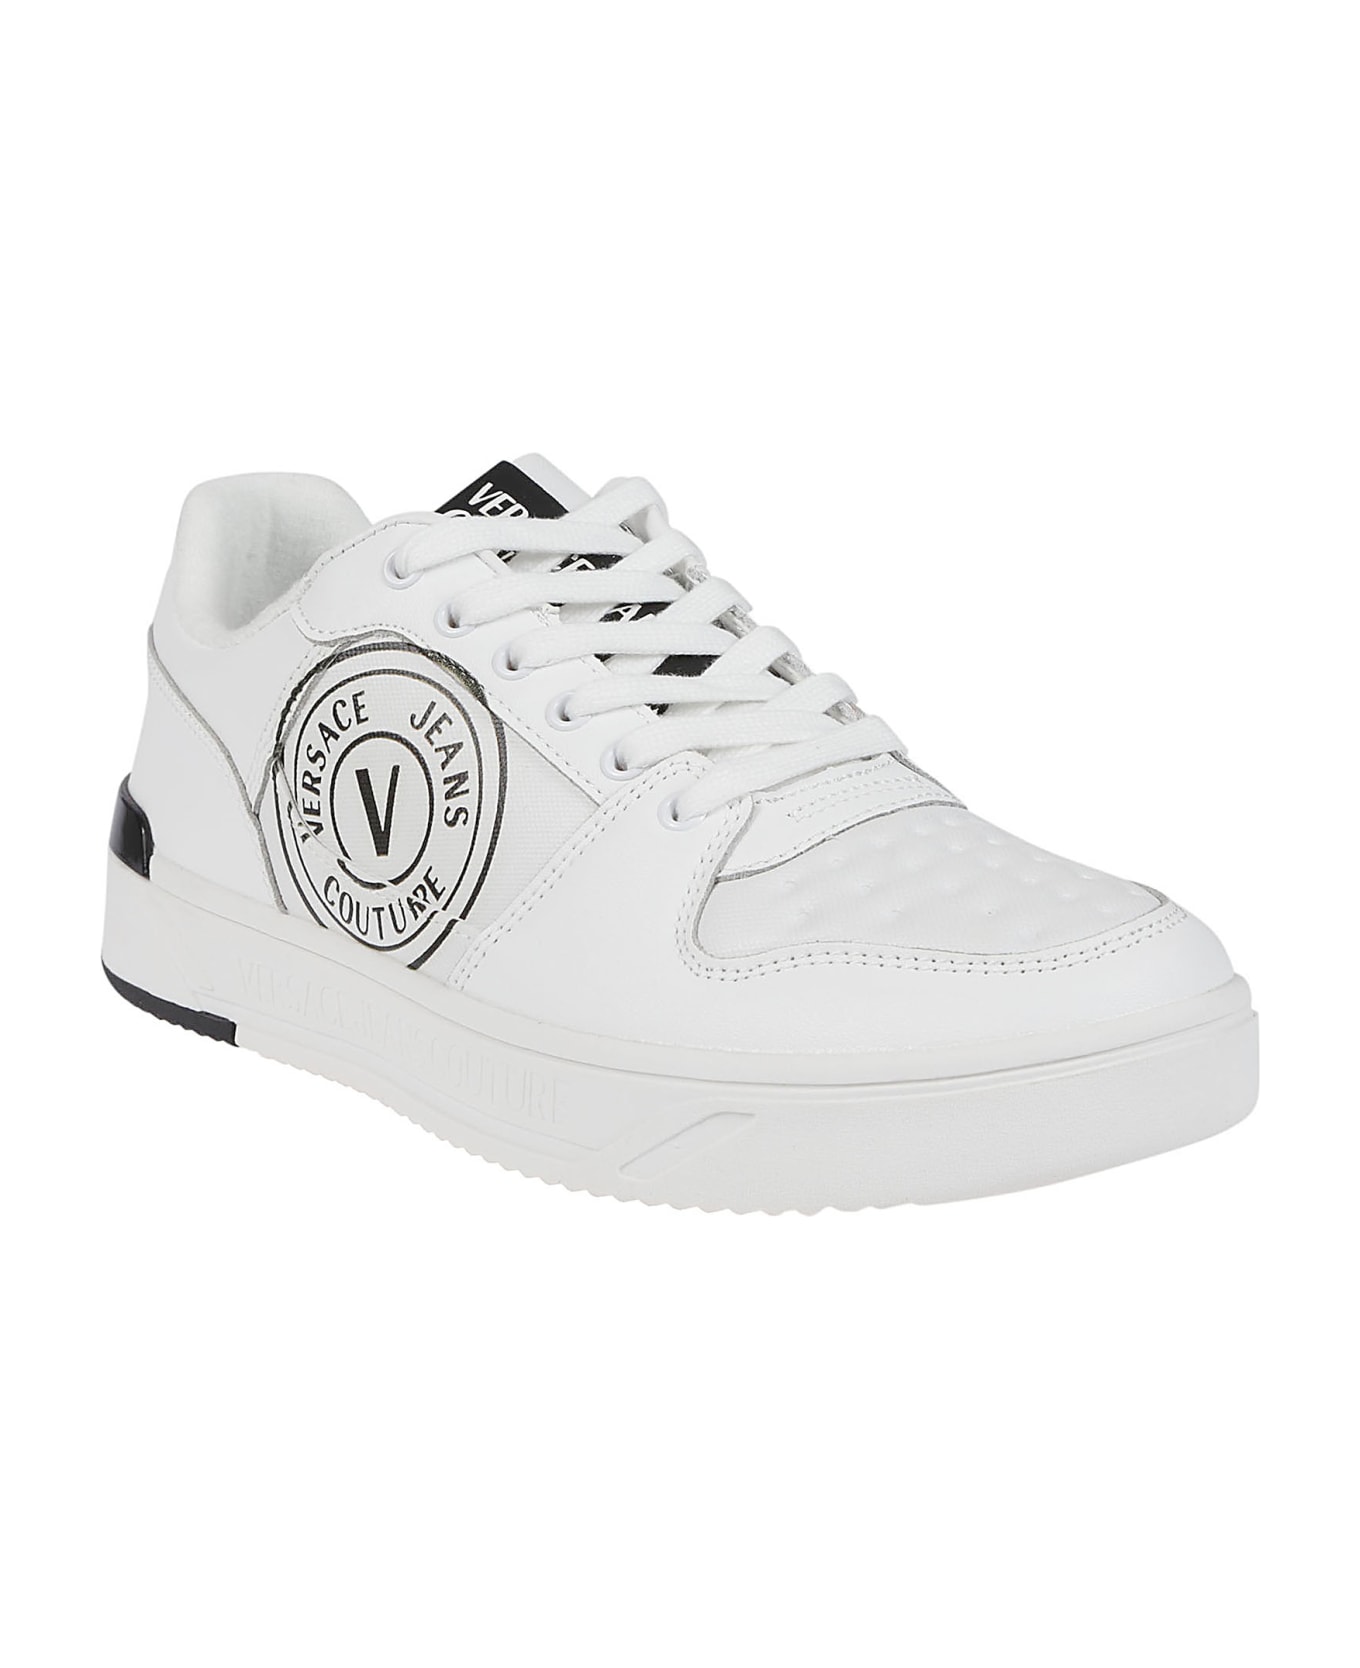 Versace Jeans Couture Starlight Sj1 Sneakers - White